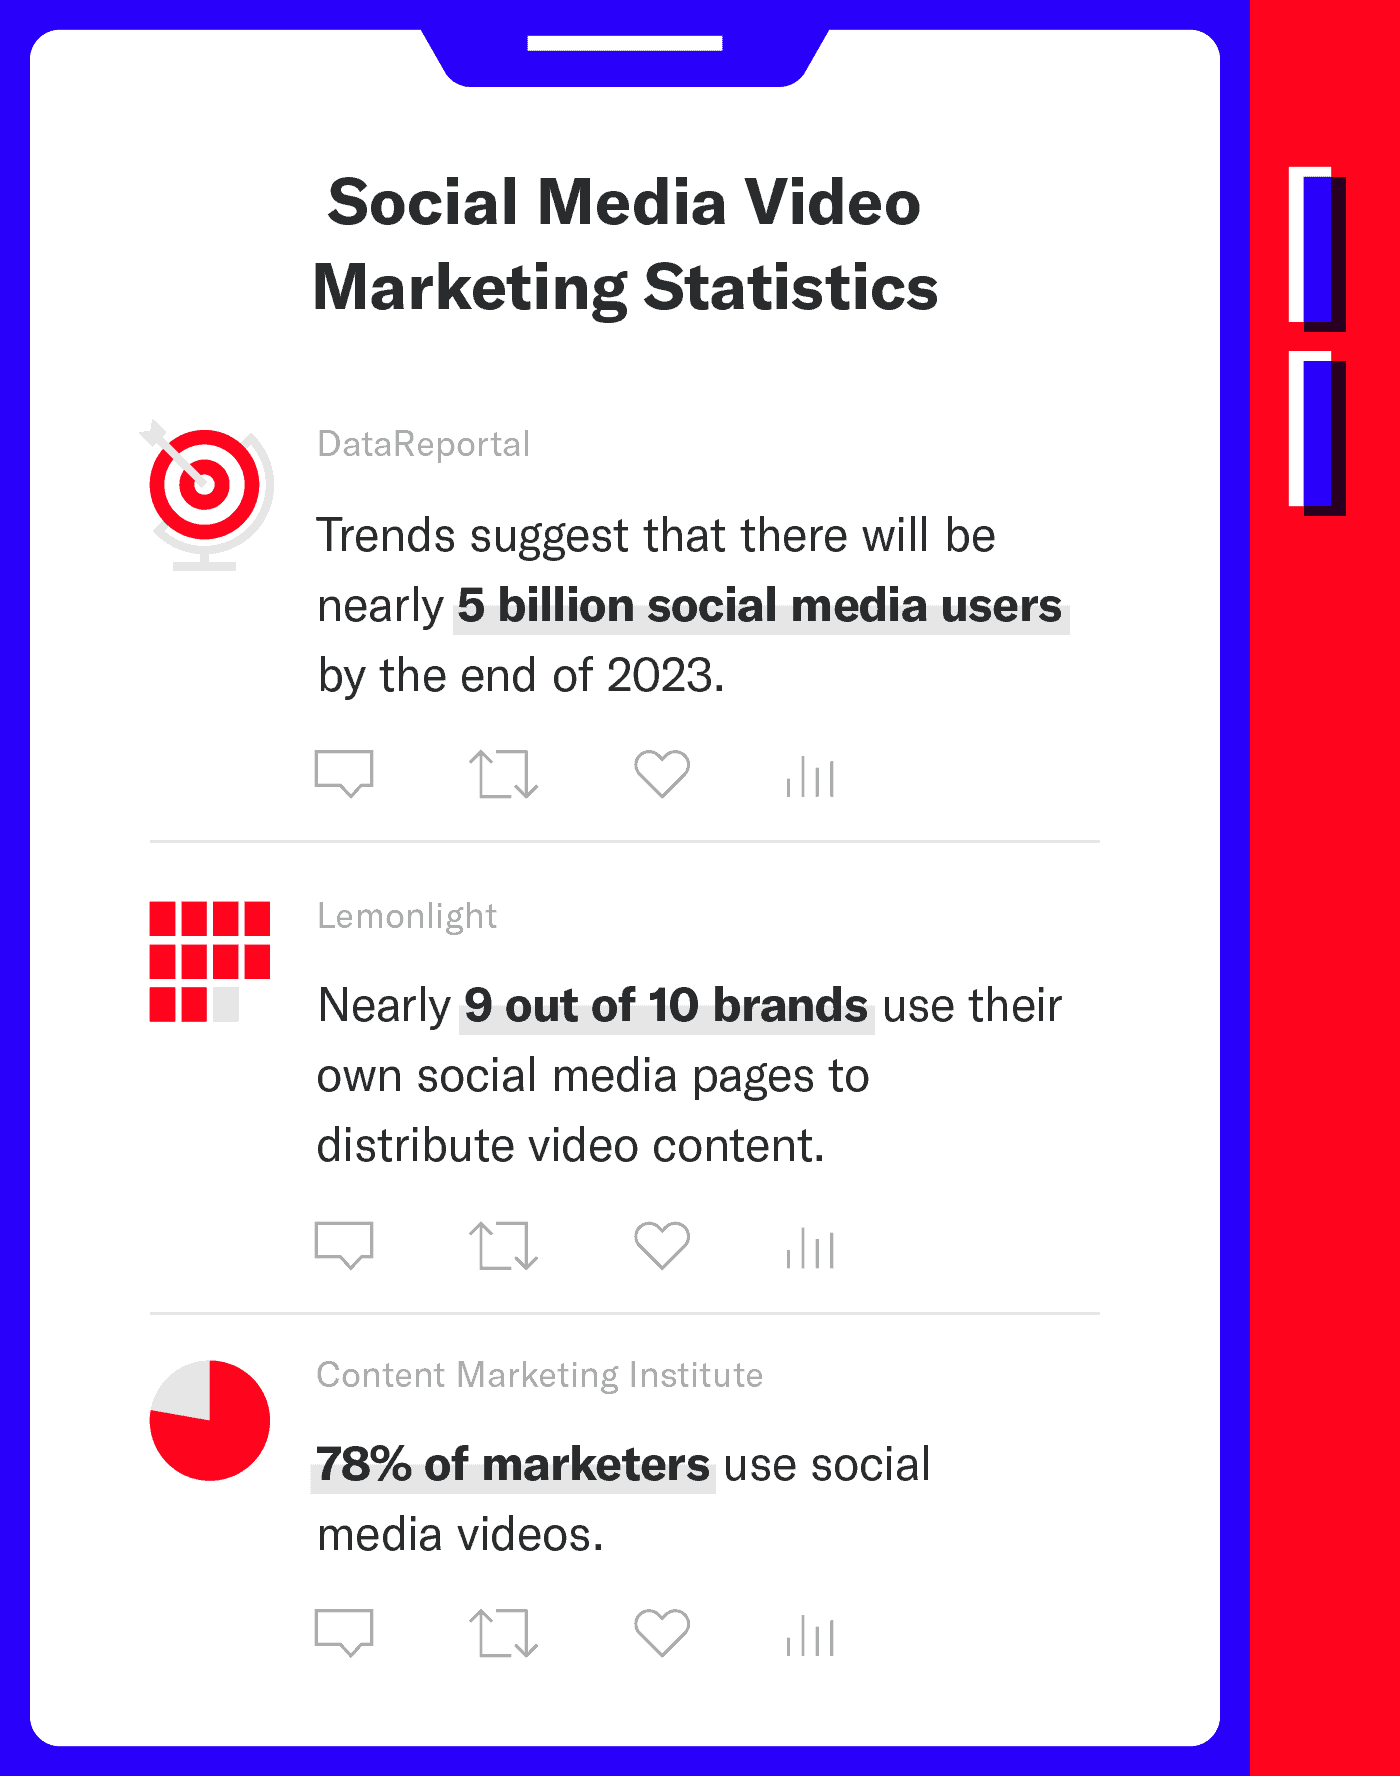 A graphic showcases three video marketing statistics related to social media